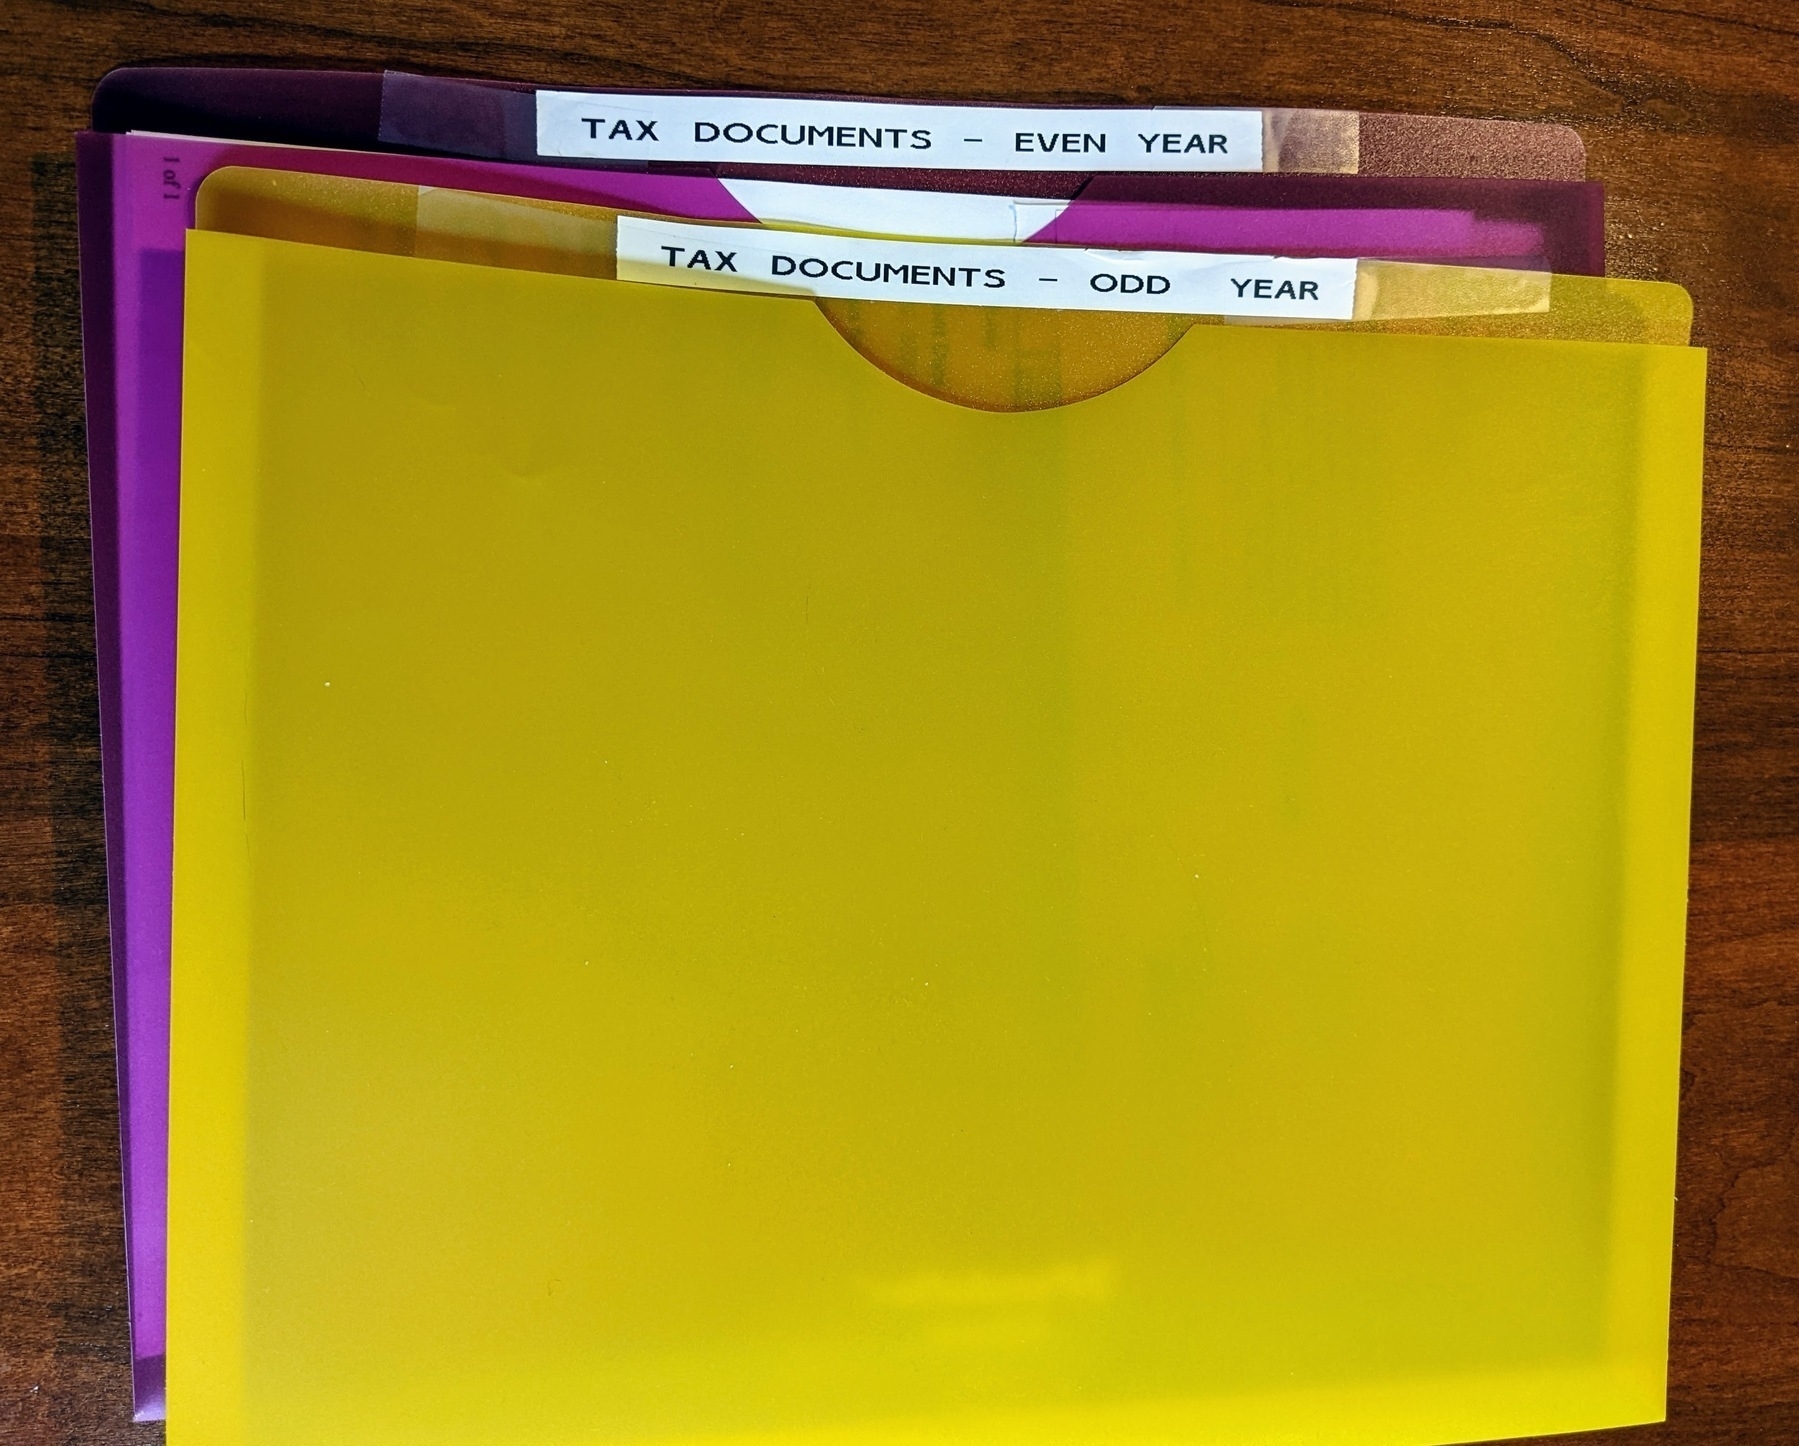 two file jacket folders labeled tax documents - even year and tax documents - odd year